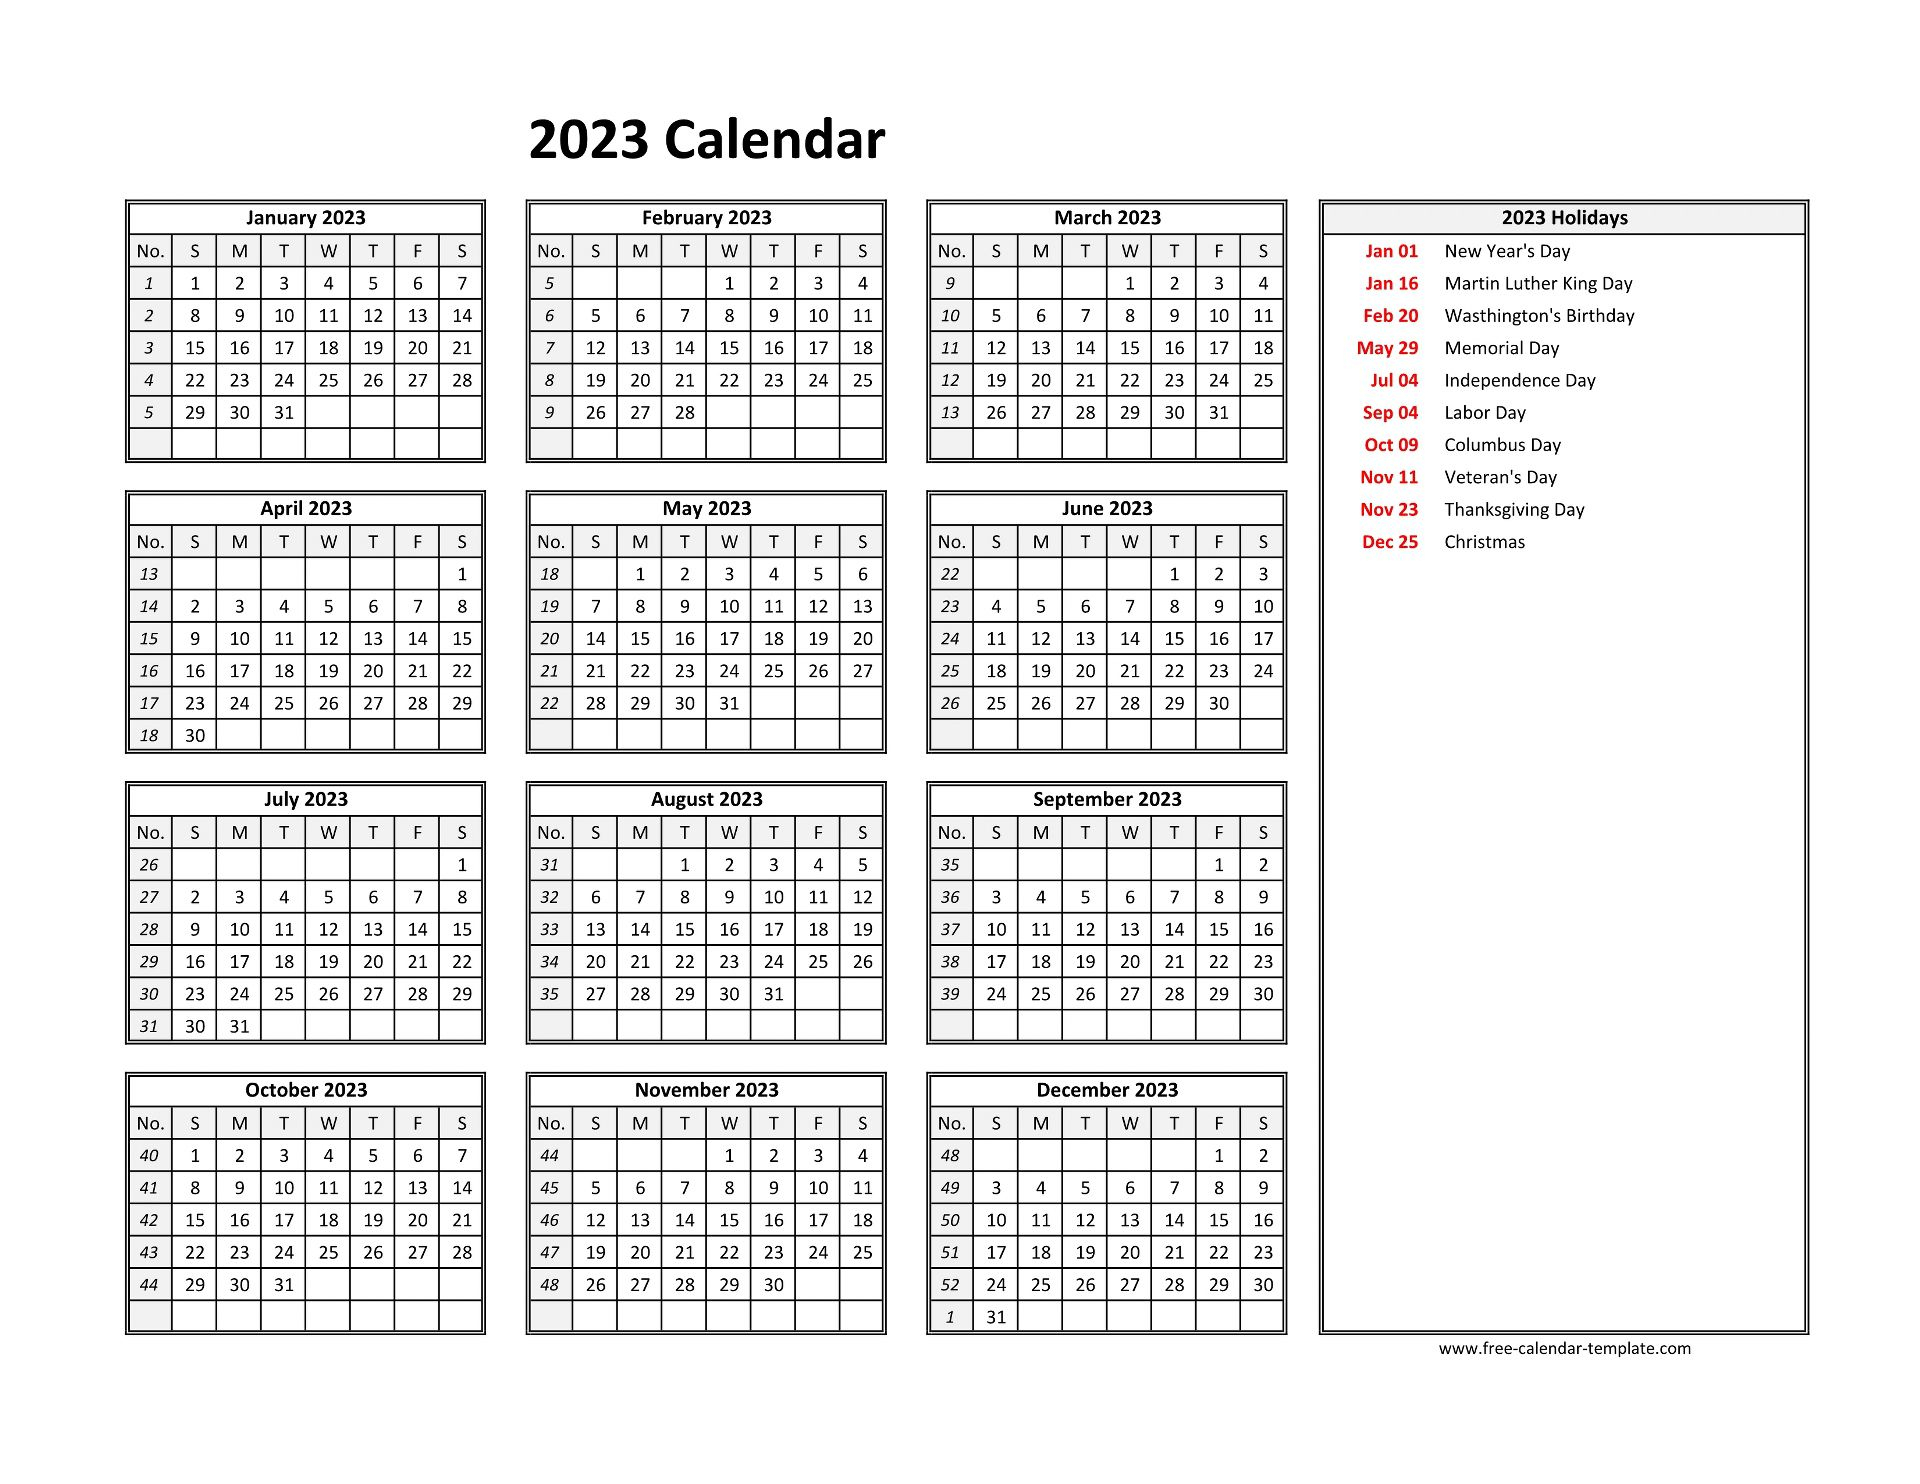 days-of-the-year-calendar-2023-printable-yearlycalendars